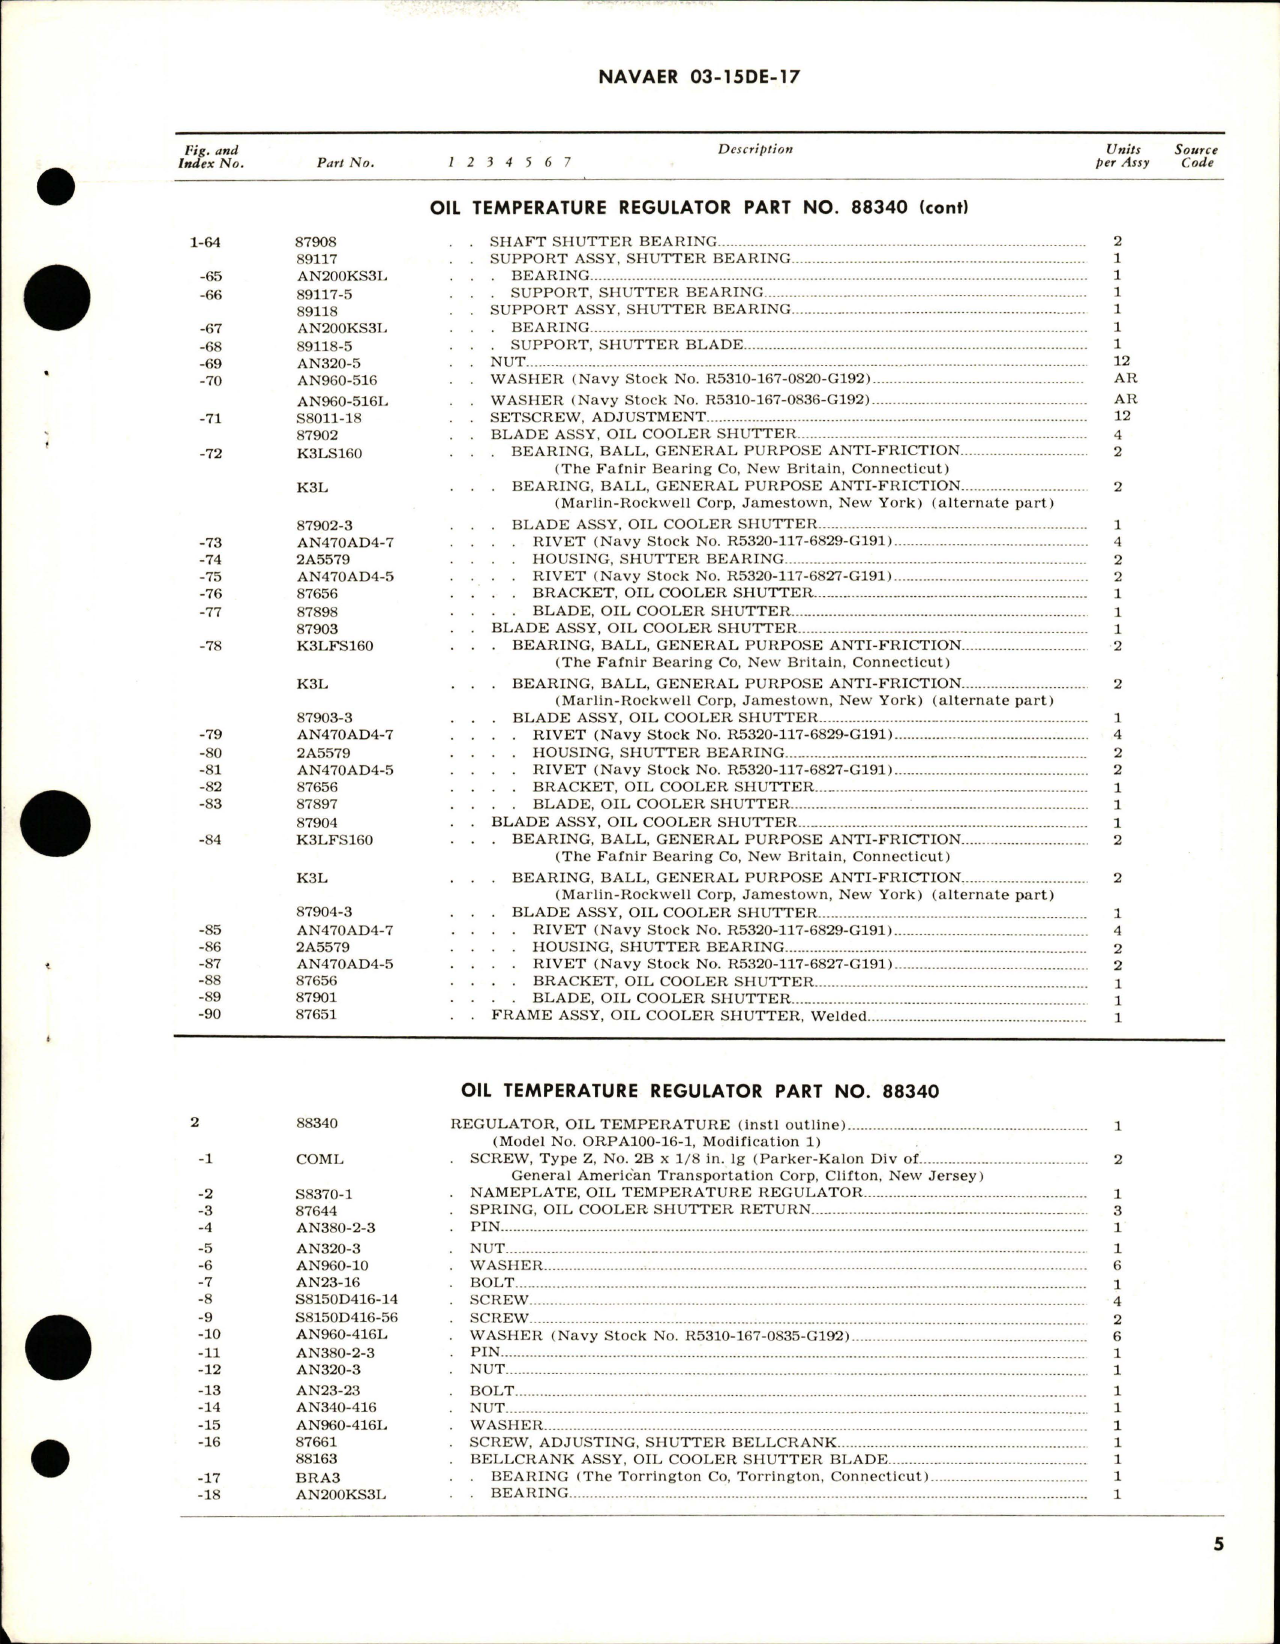 Sample page 5 from AirCorps Library document: Overhaul Instructions with Parts Breakdown for Oil Temperature Regulator - Part 88340 - Model ORPA100-16-1